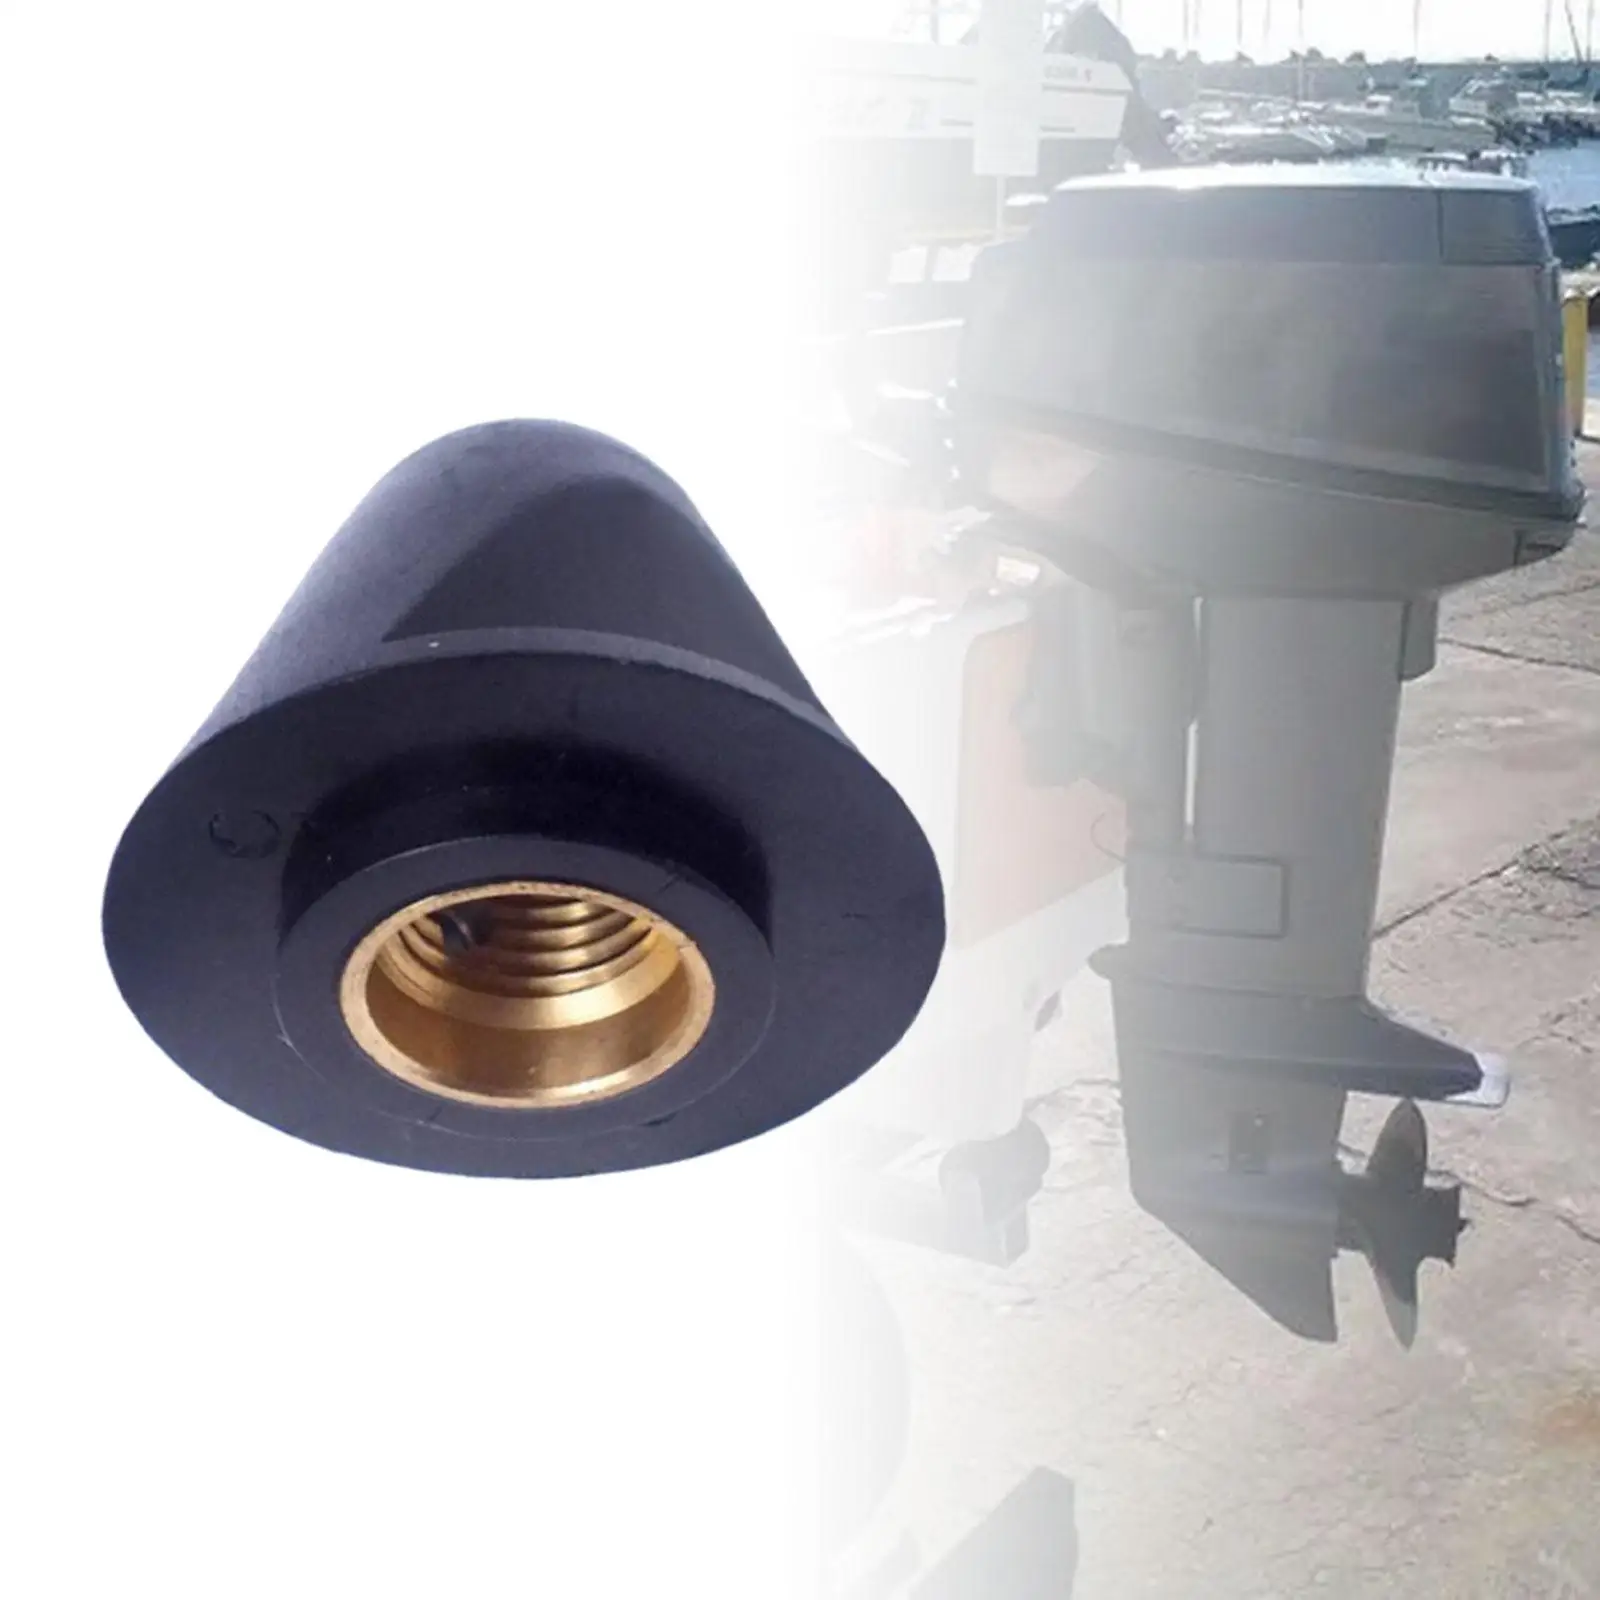 626-45616-01 Easy to Use High Performance Propeller Prop Nut Replaces for Yamaha Outboard Motor Old Version 6HP 8HP 9.9HP